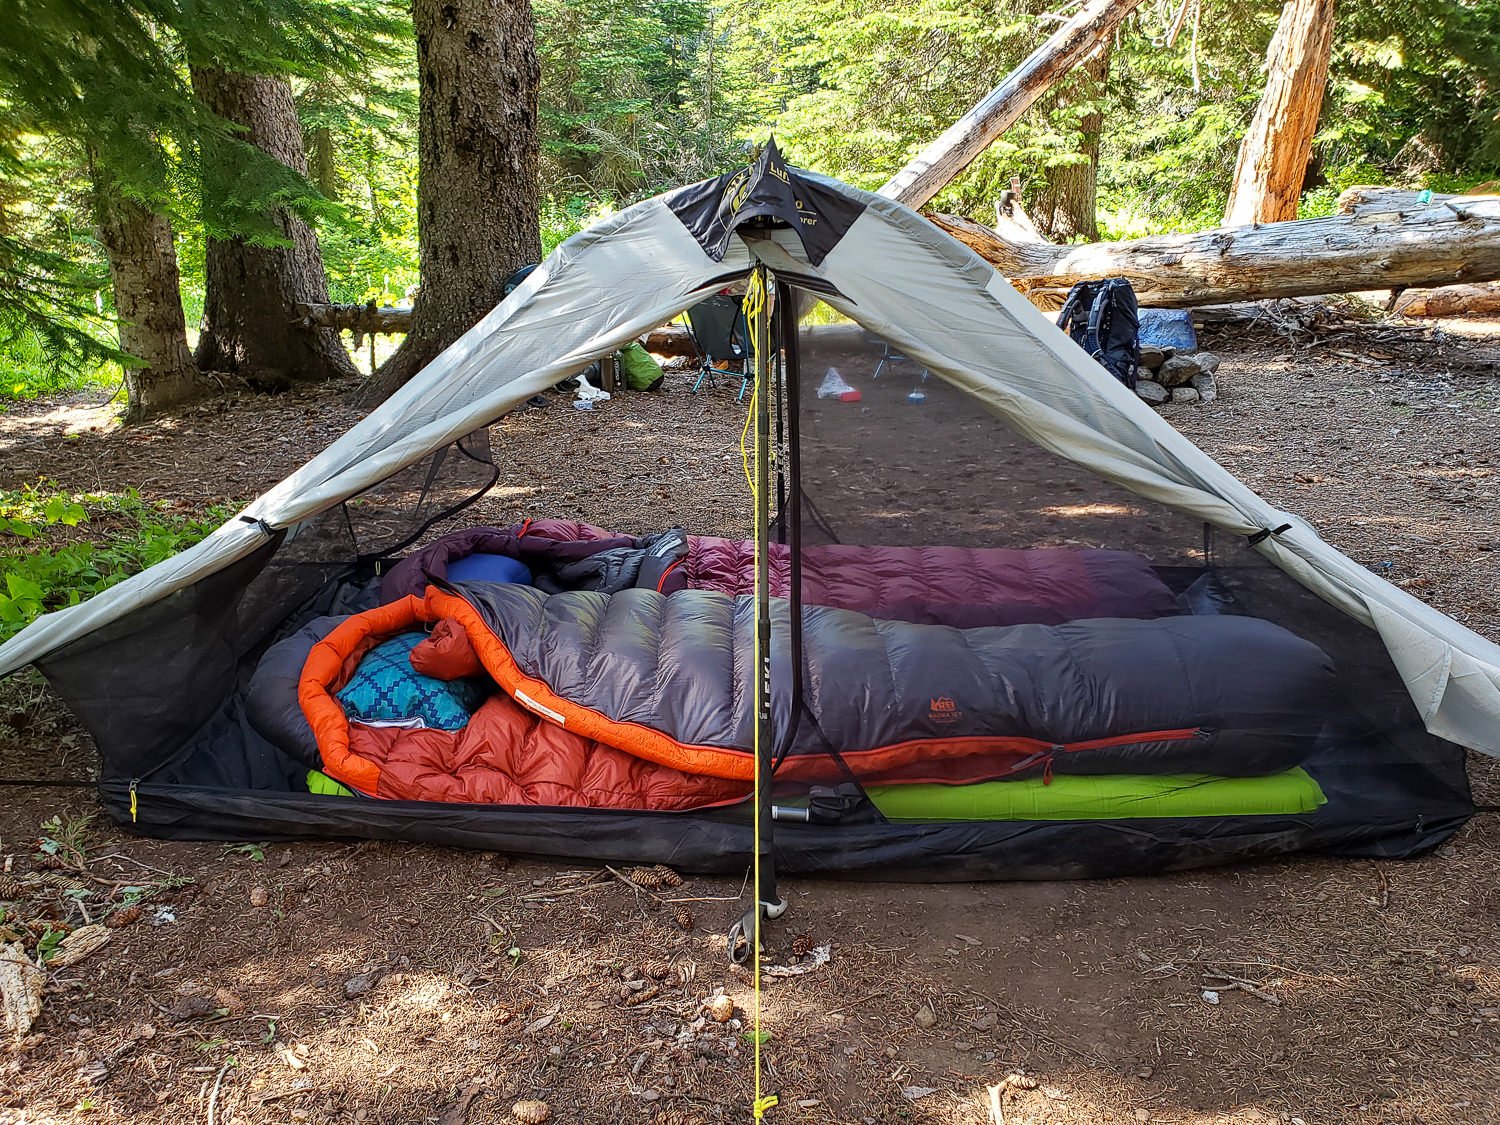 The REI Magma 15 in a backpacking tent